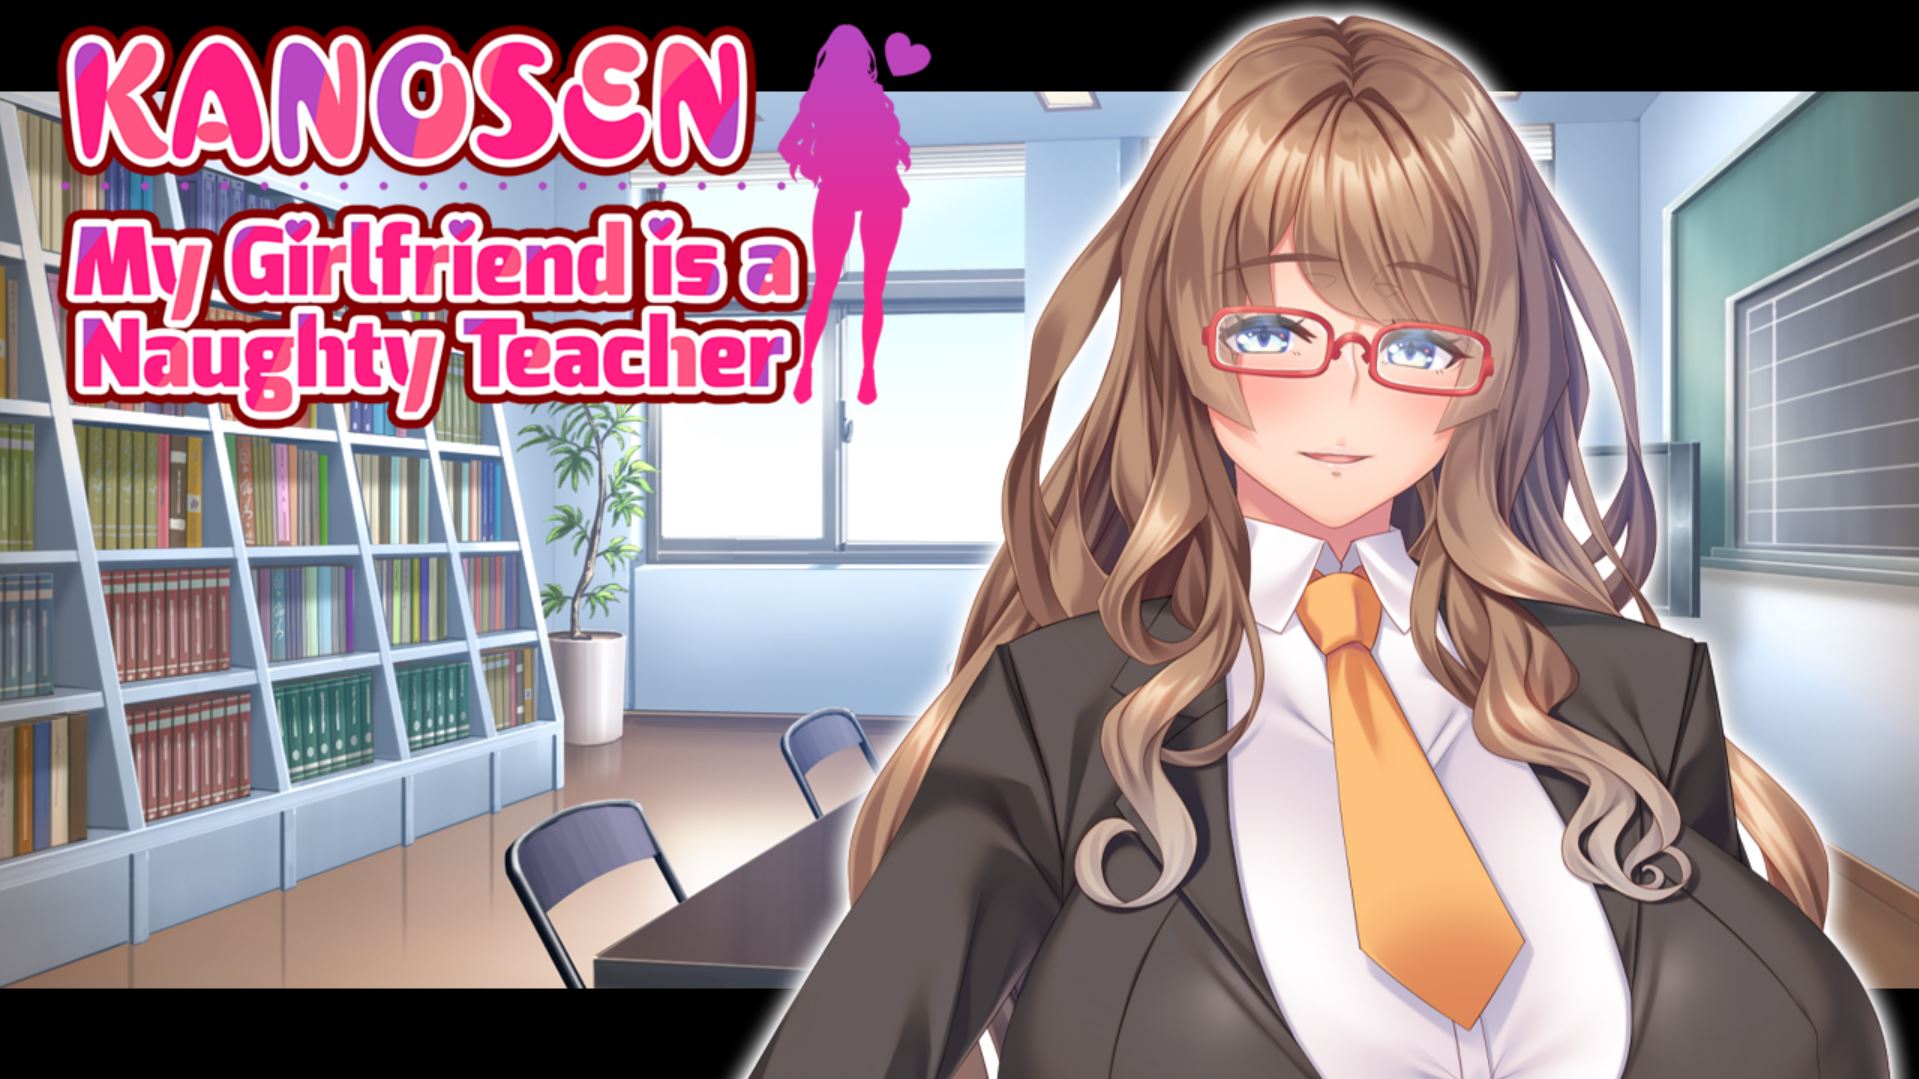 Teacher Sexy Download - KANOSEN My Girlfriend is a Naughty Teacher Others Porn Sex Game v.Final  Download for Windows, MacOS